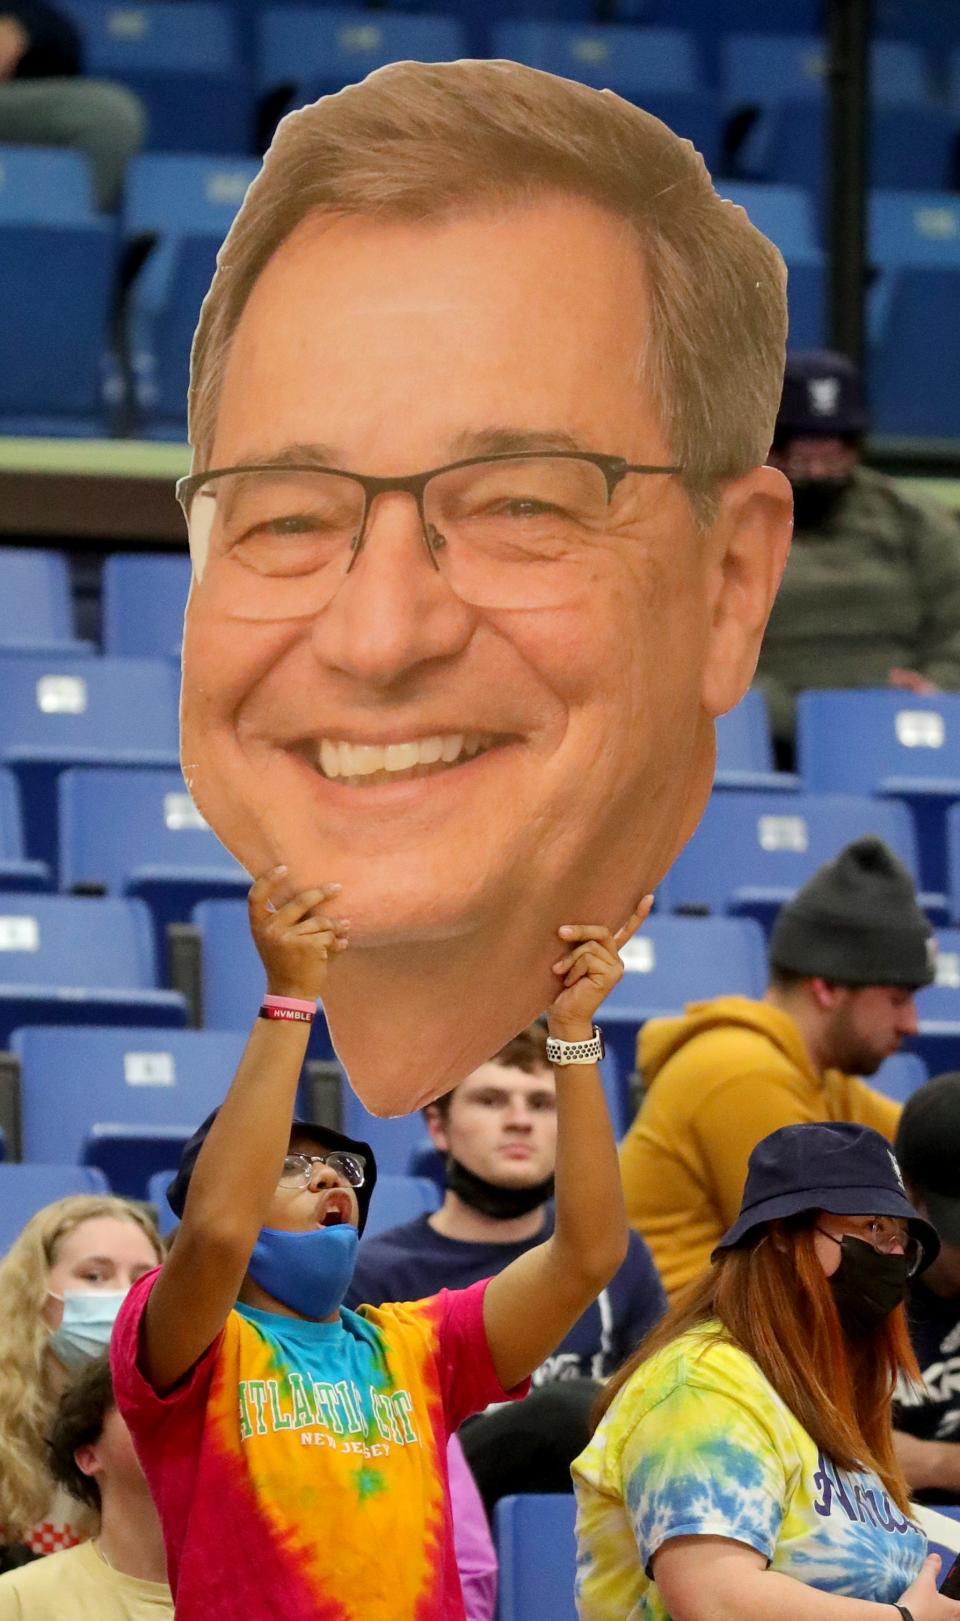 An Akron fan holds up a photo of then-UA President Gary Miller while in the stands in 2022, cheering on the Zips against Bowling Green at the James A. Rhodes Arena in Akron.